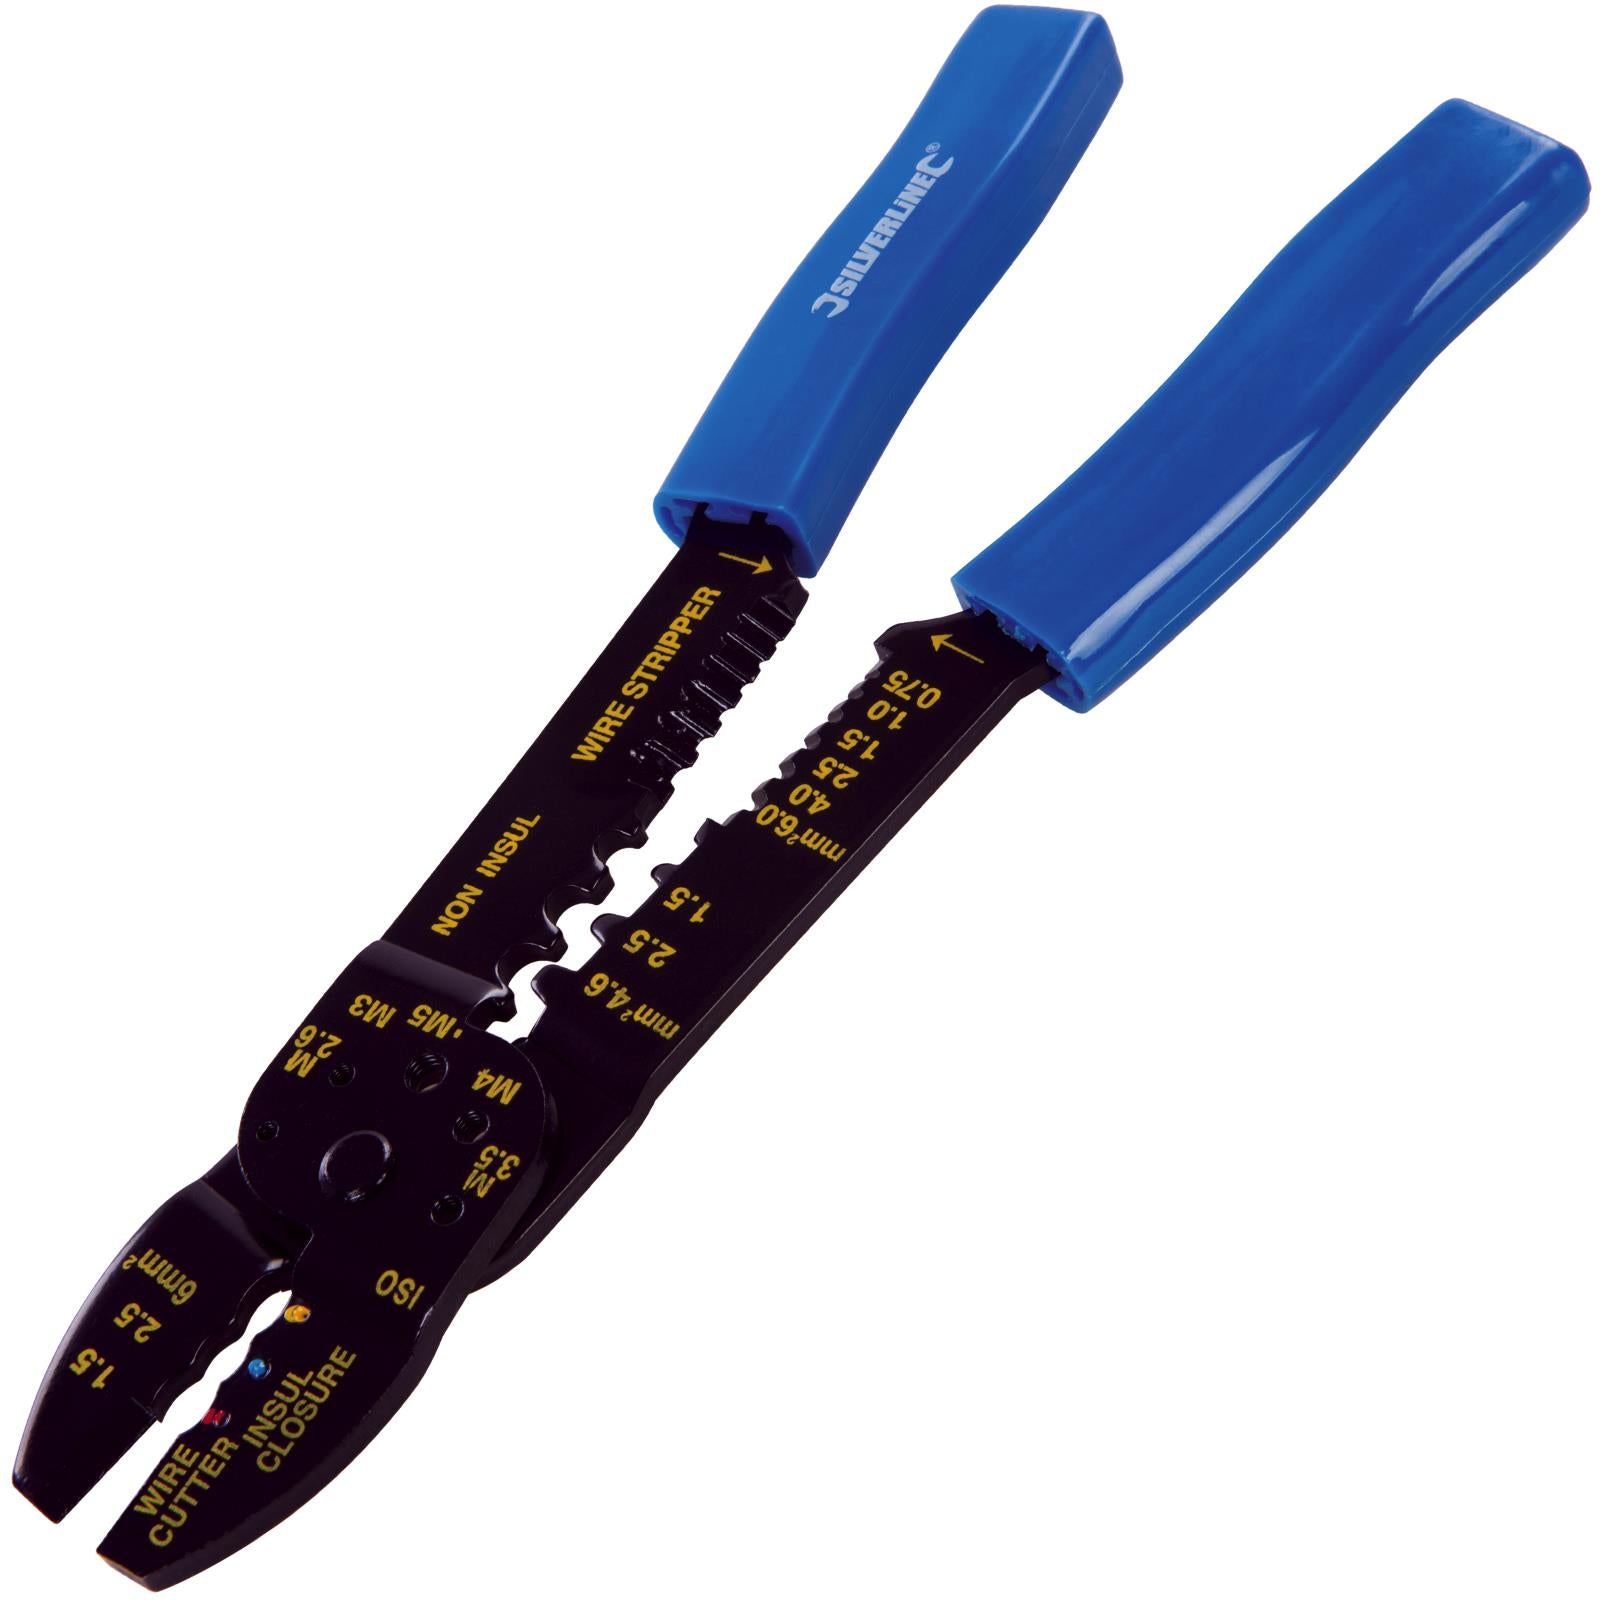 Silverline 230mm Crimping & Stripping Pliers Insulated Terminals